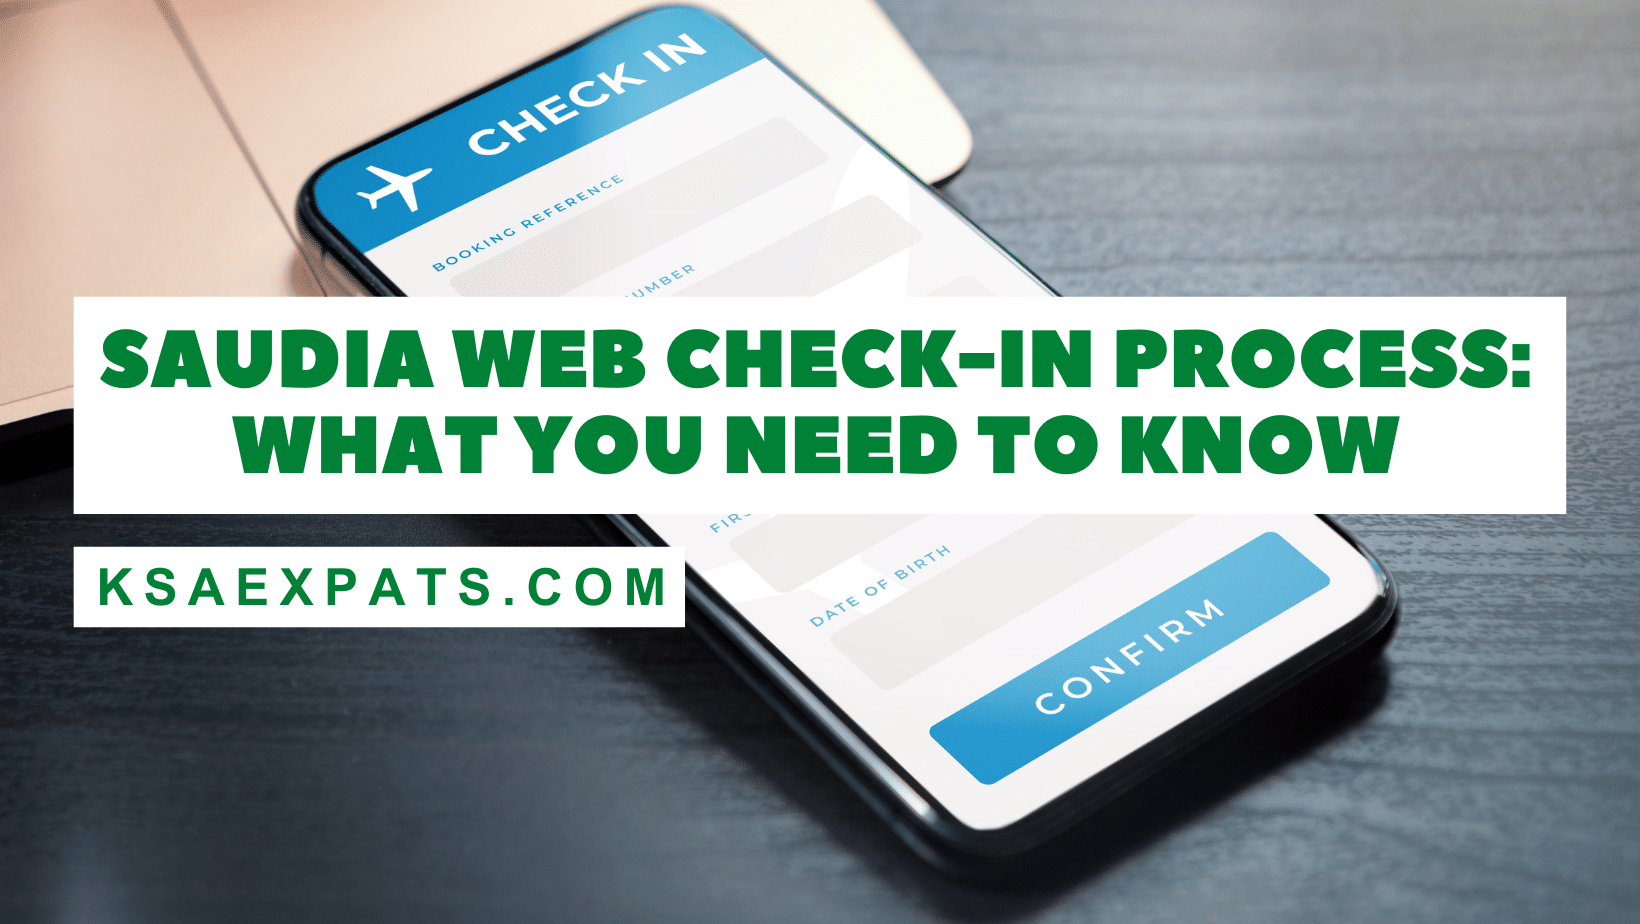 Saudia Web Check-In Process: What You Need to Know